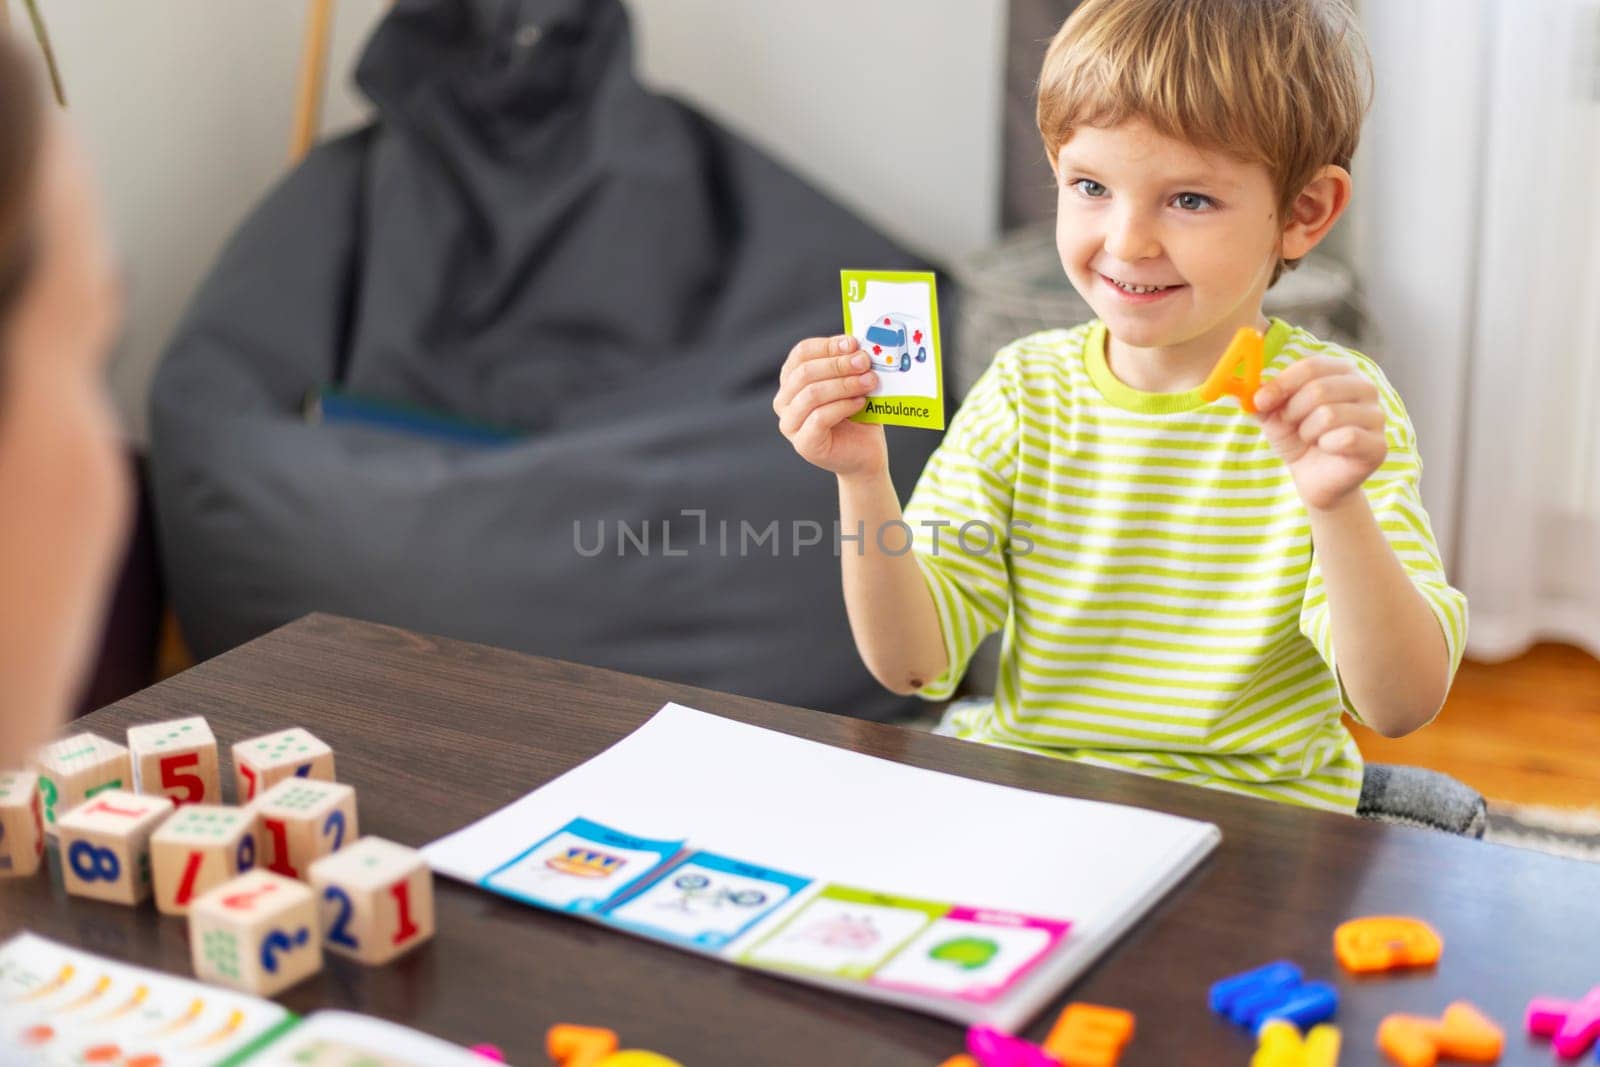 Smiling boy playing learning game with cards and colorful letters. Educational activity concept.